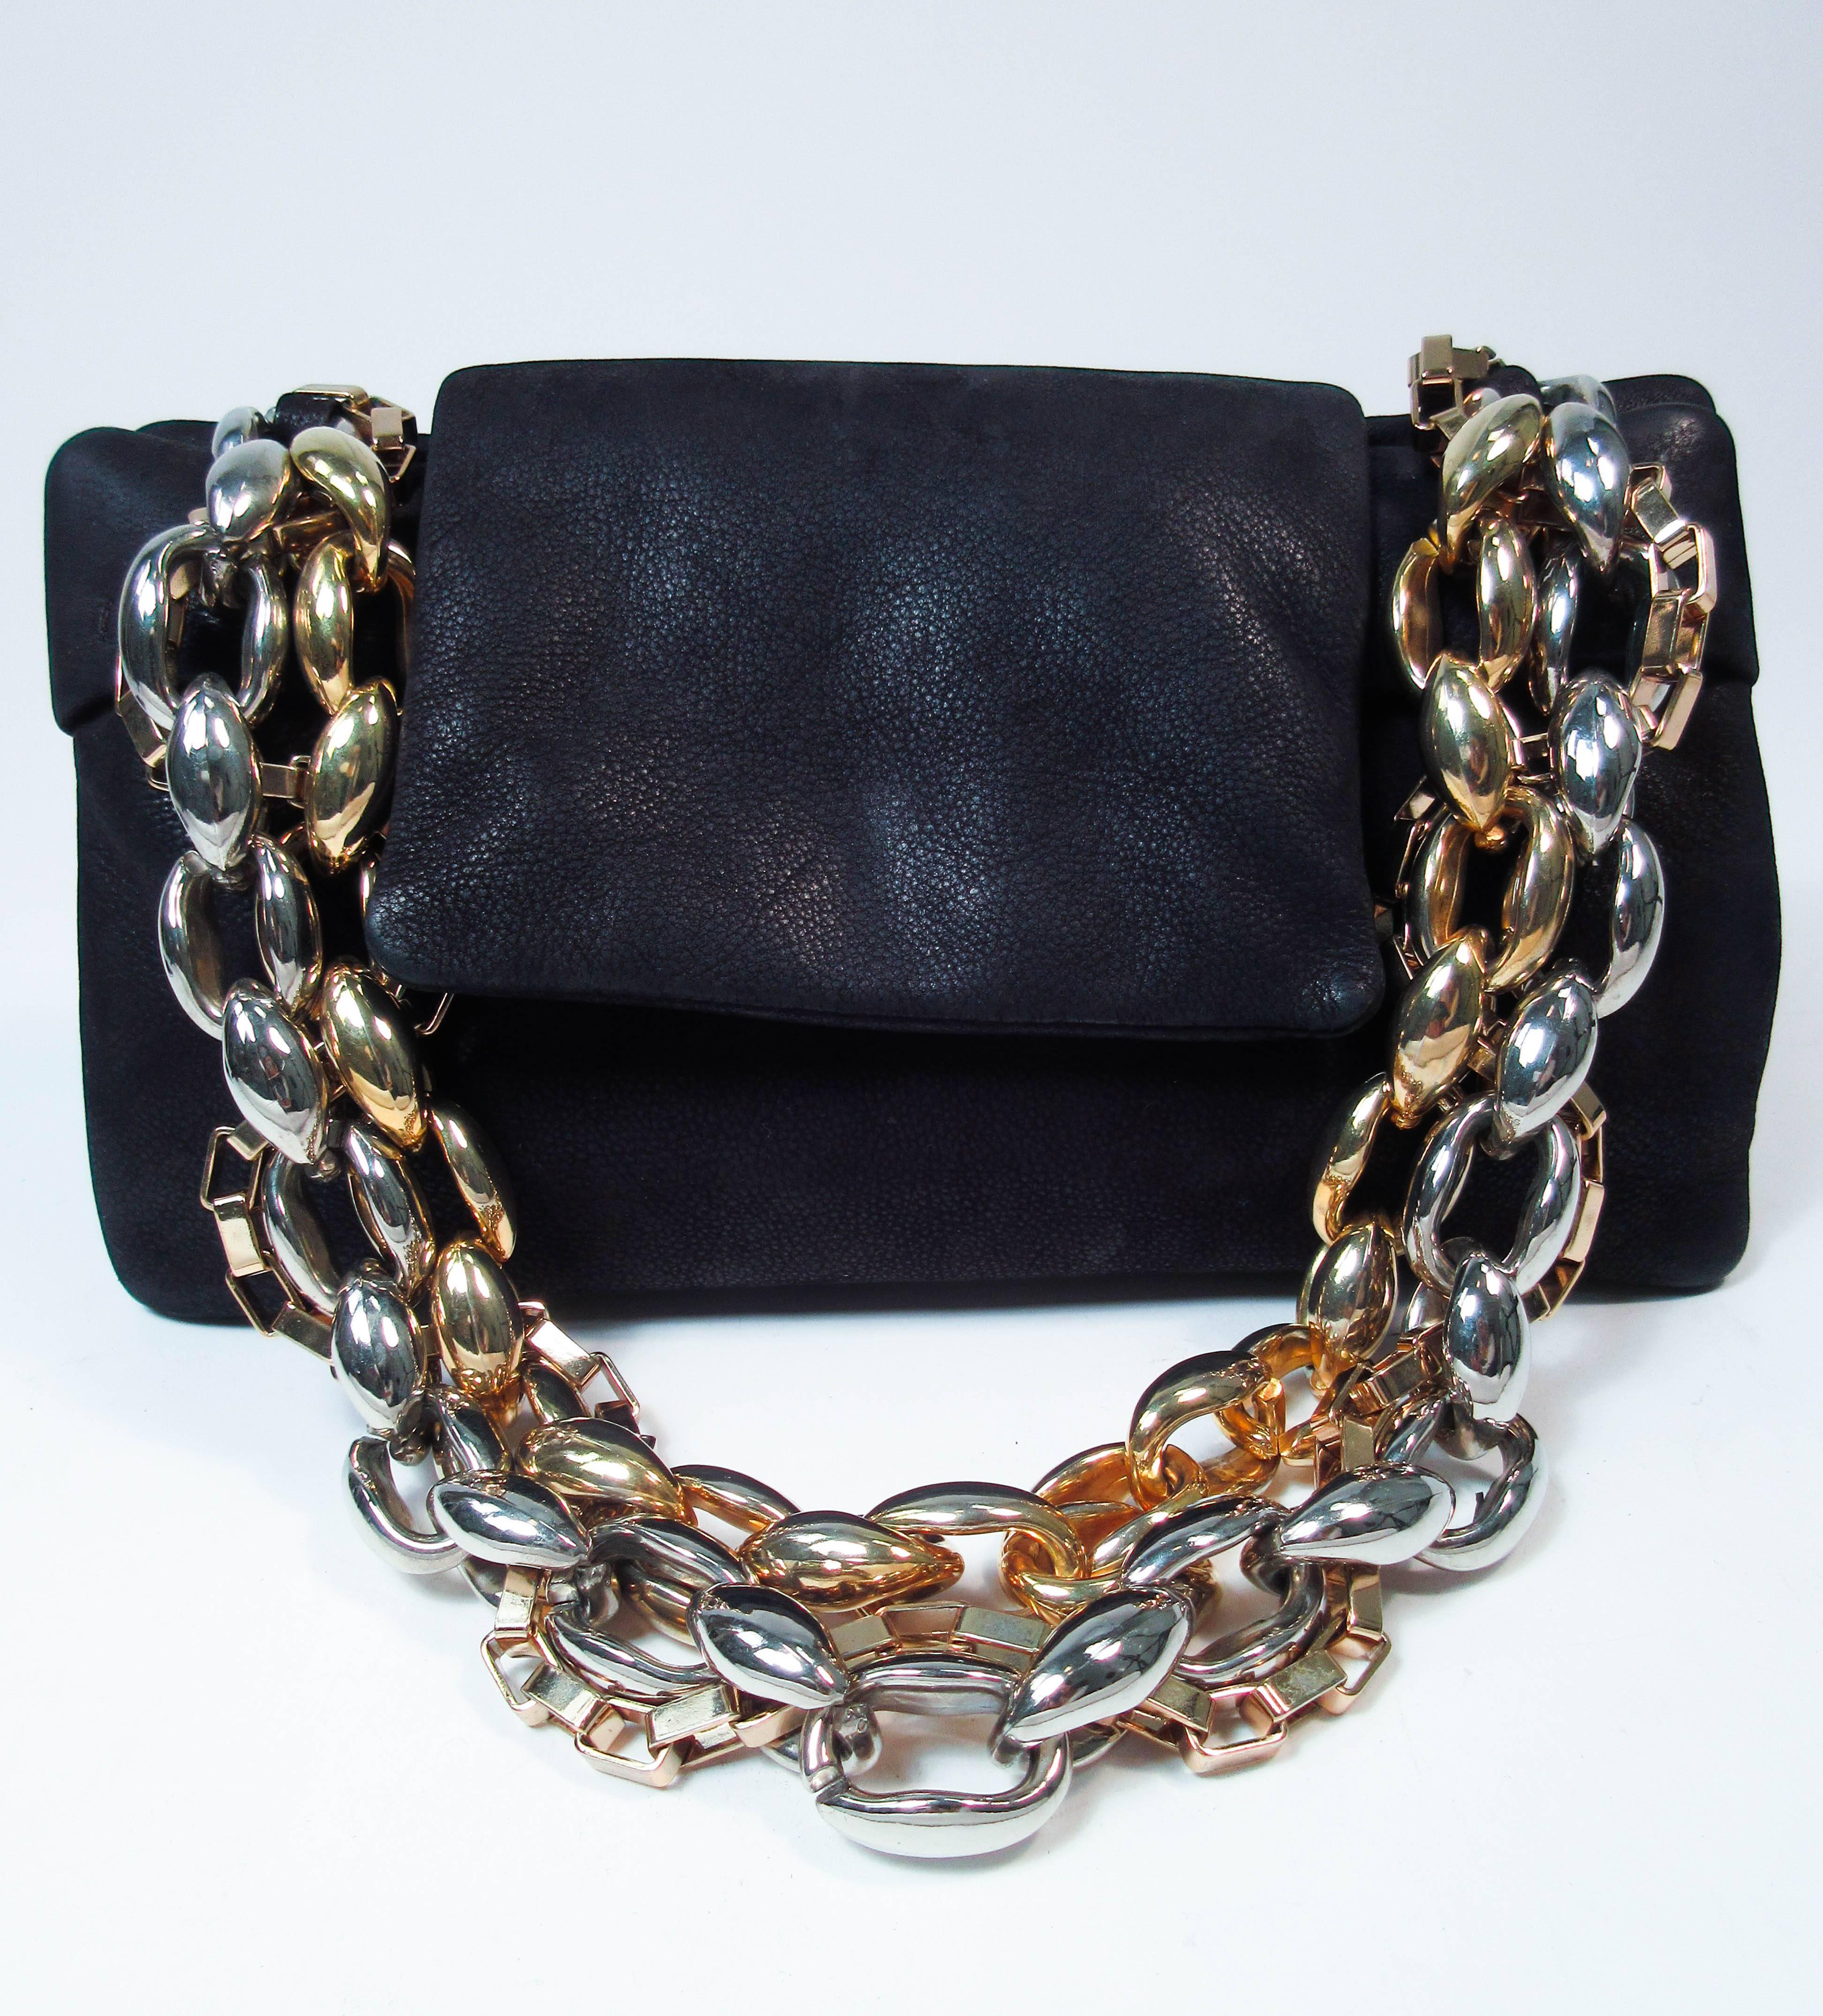 This Paule Ka design is composed of a supple black pig skin. Features a multi-hue chain strap with magnetic closure, and flip open style. There is an interior zipper compartment with mirror and multiple card holders. In excellent pre-owned condition